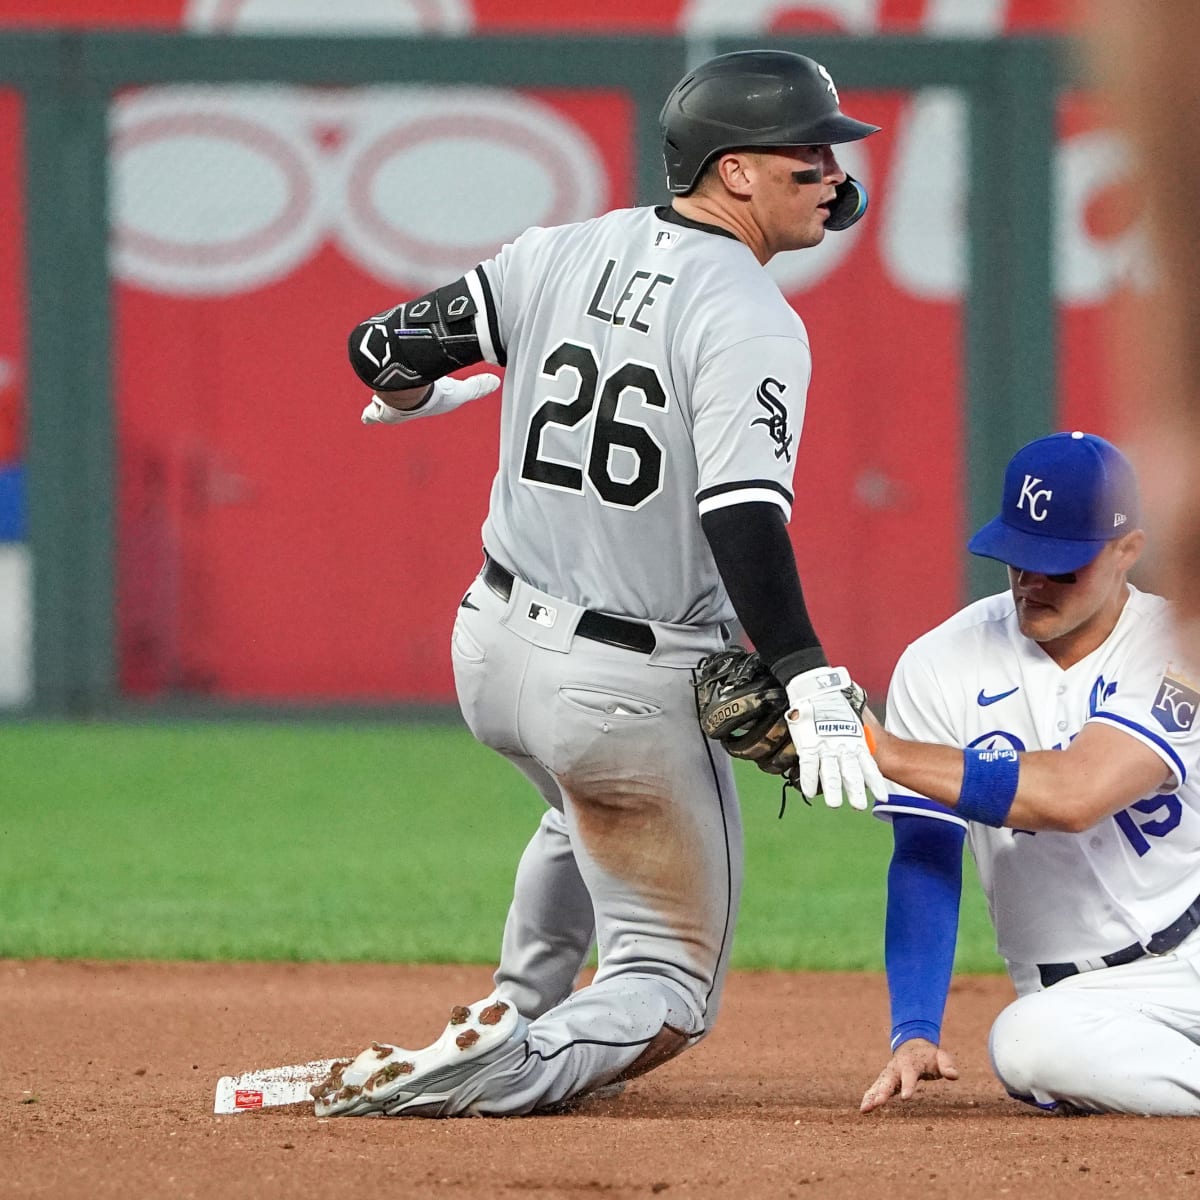 Chicago White Sox catcher Korey Lee hits first MLB home run - On